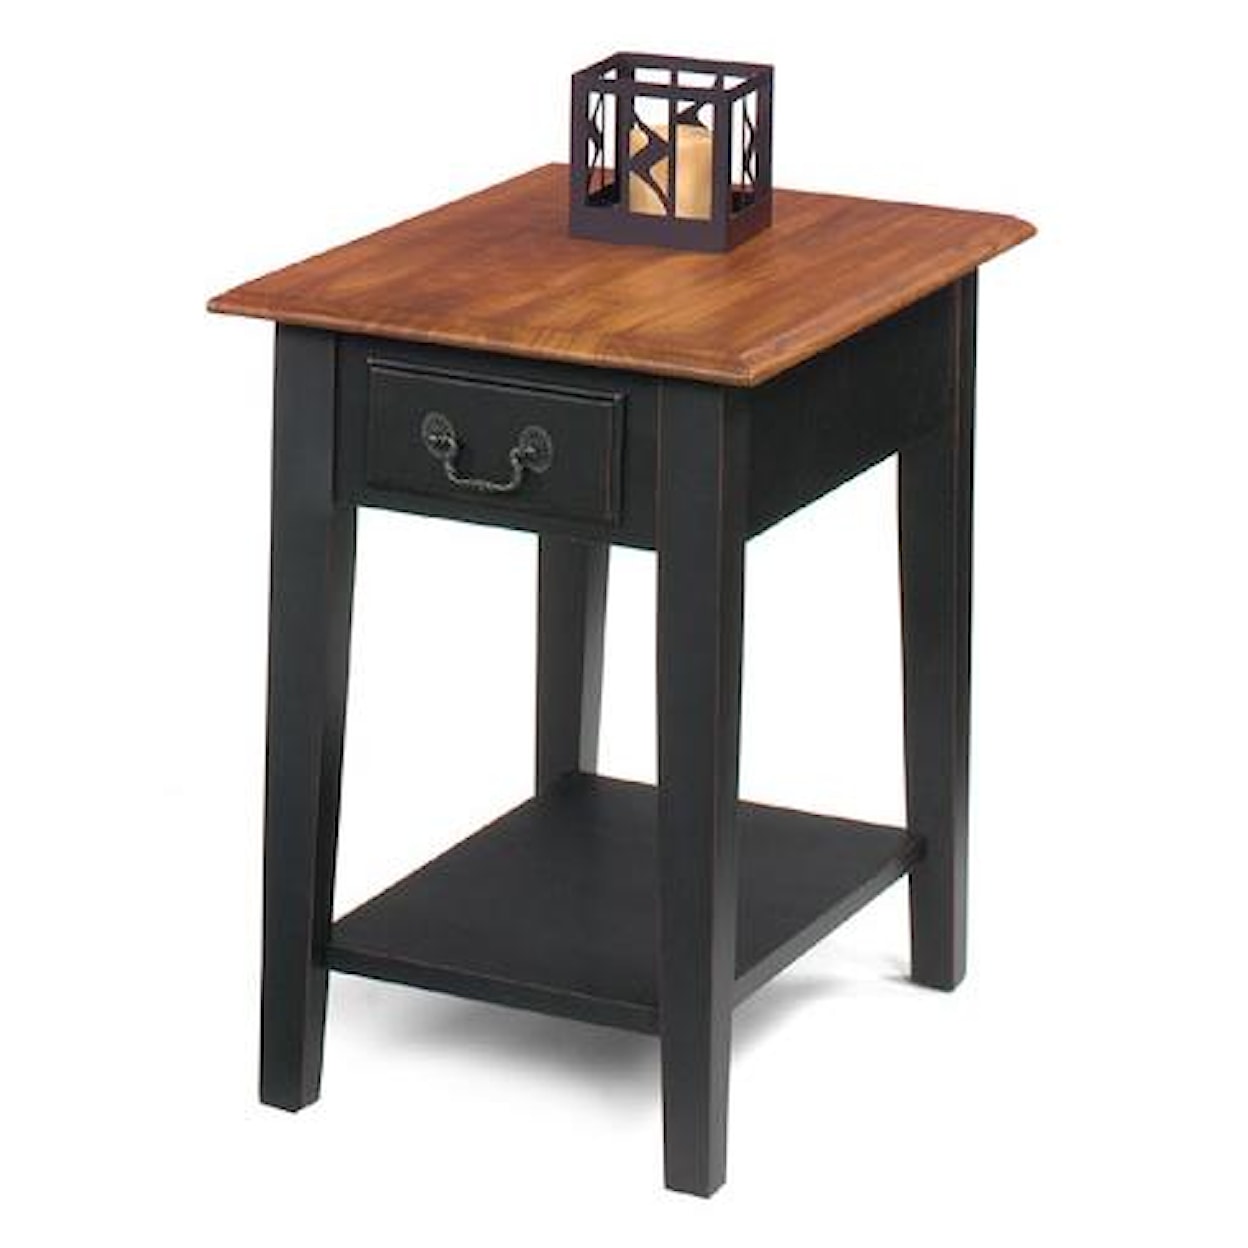 Null Furniture 1900 International Accents Rectangular End Table